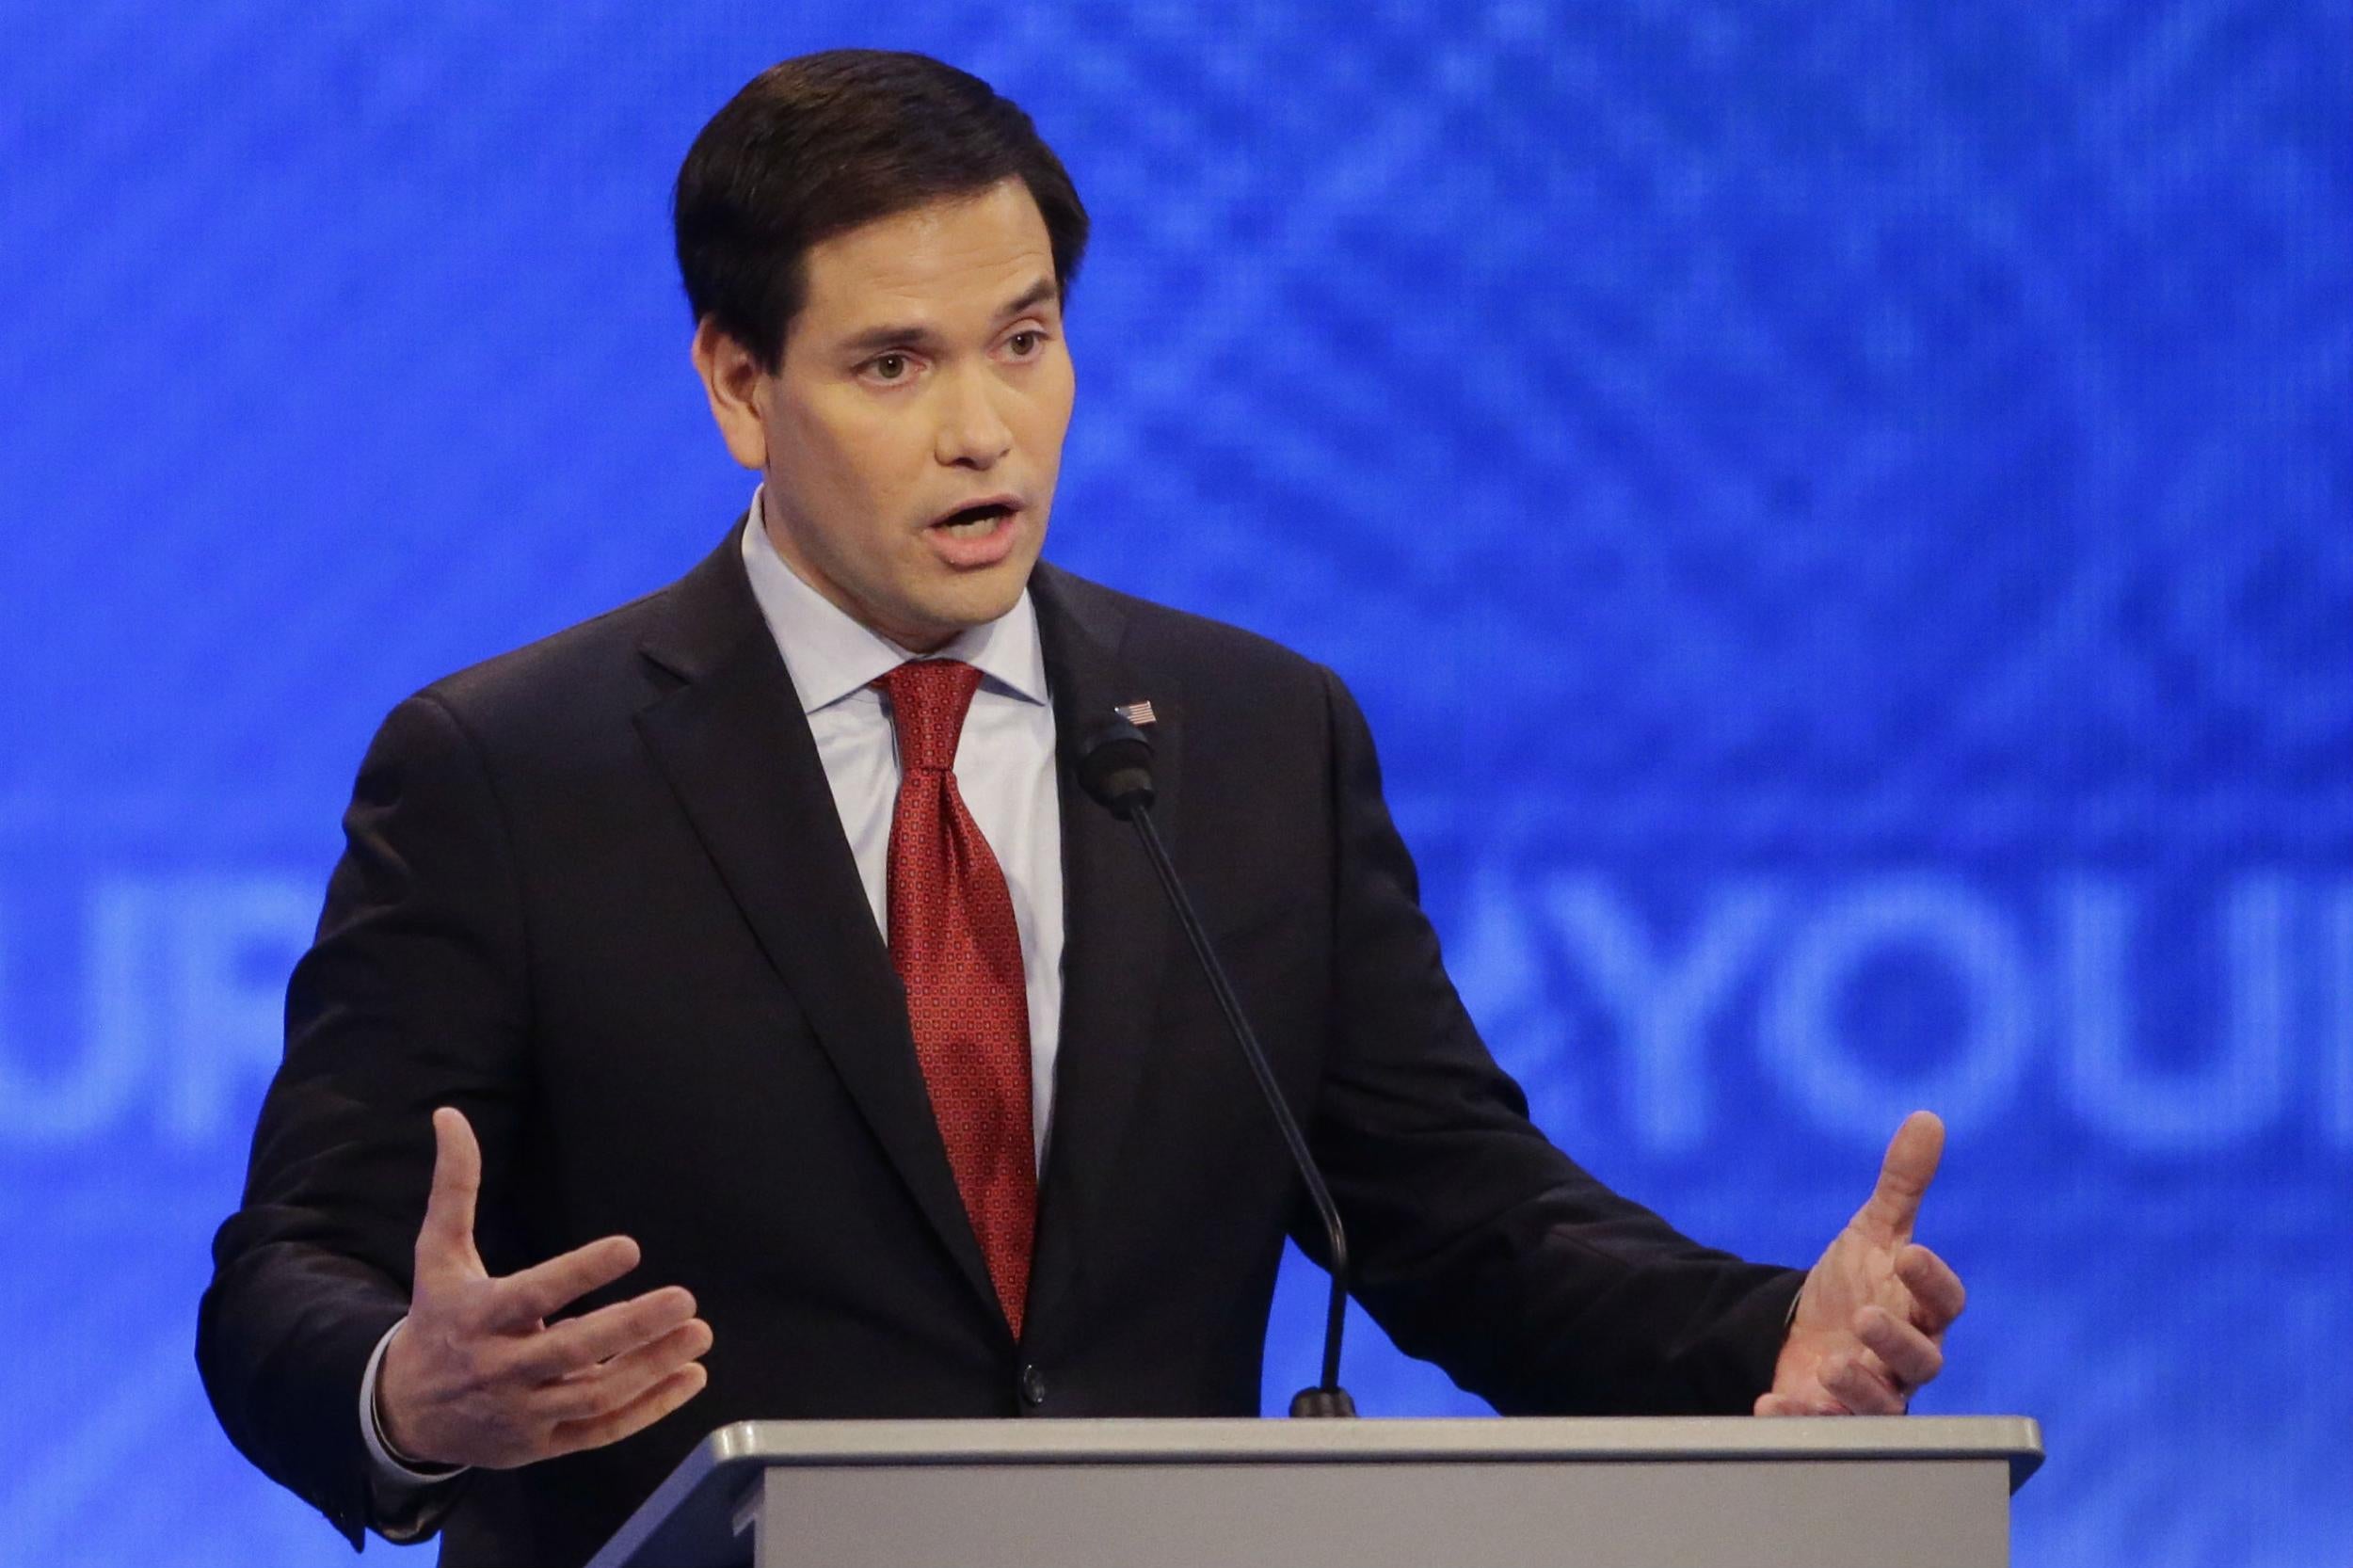 Marco Rubio said he would rather lost the White House than compromise on the issue of abortion